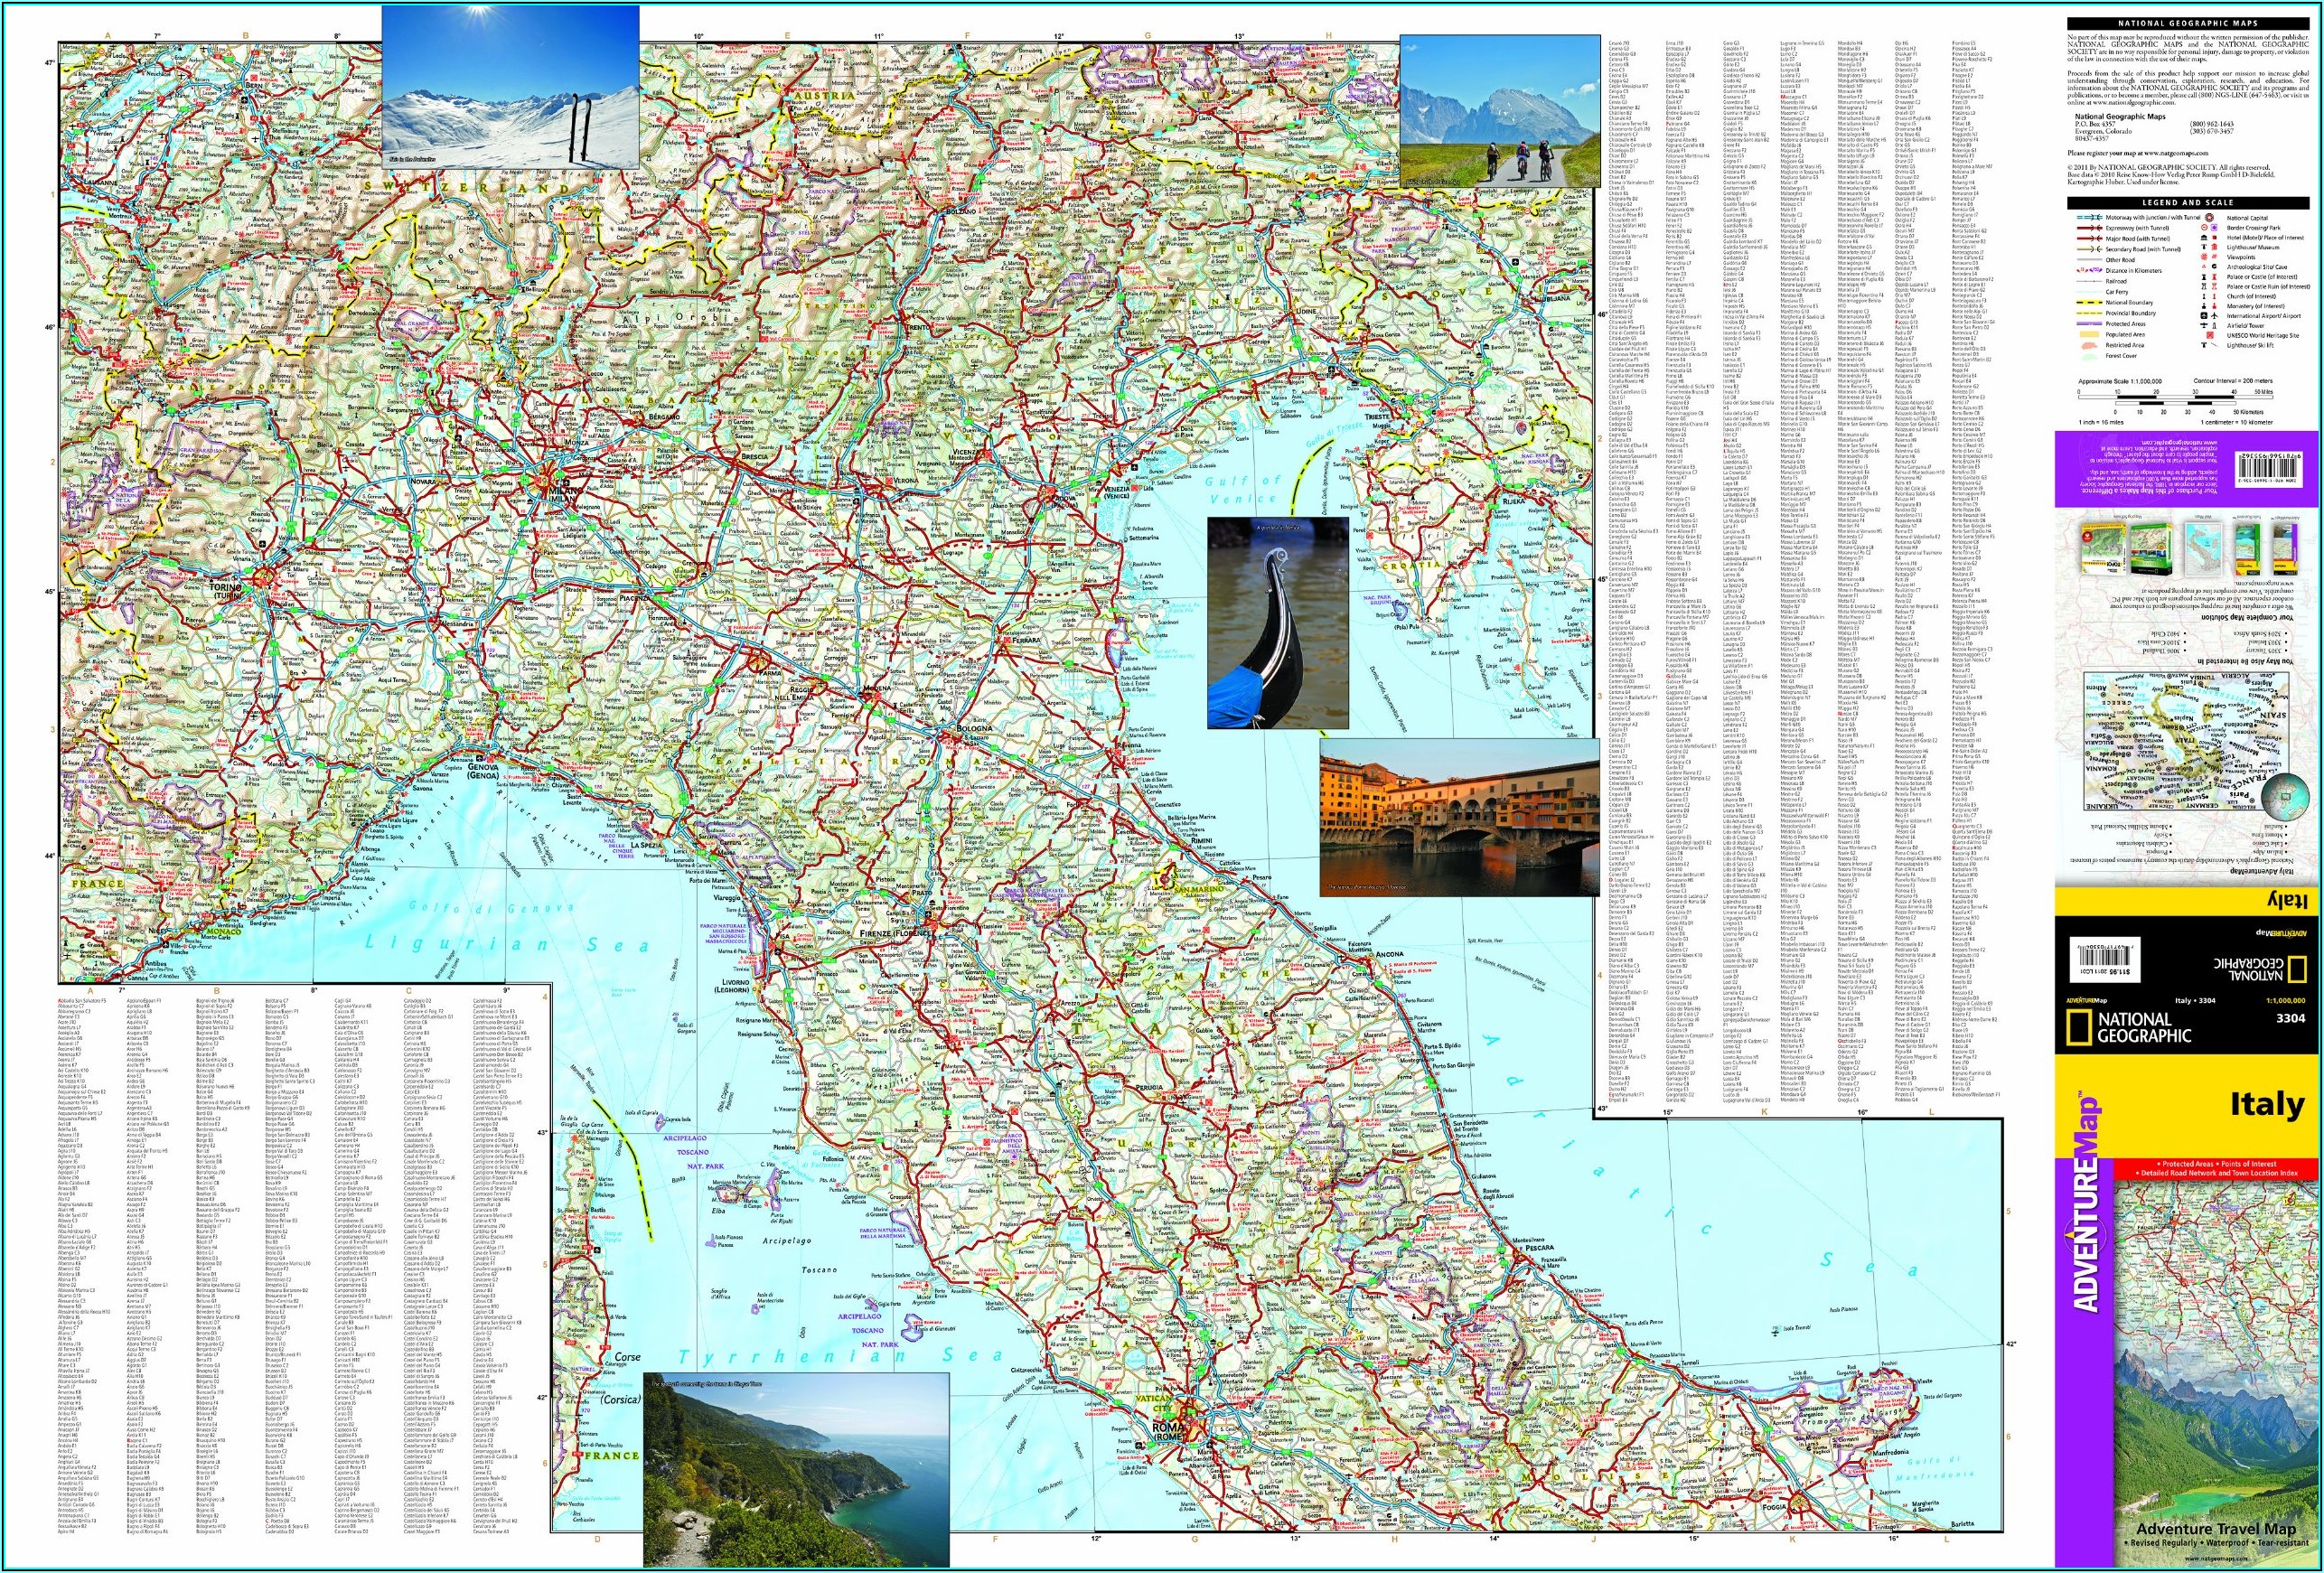 To Visit National Geographic And See The Map Of Italy